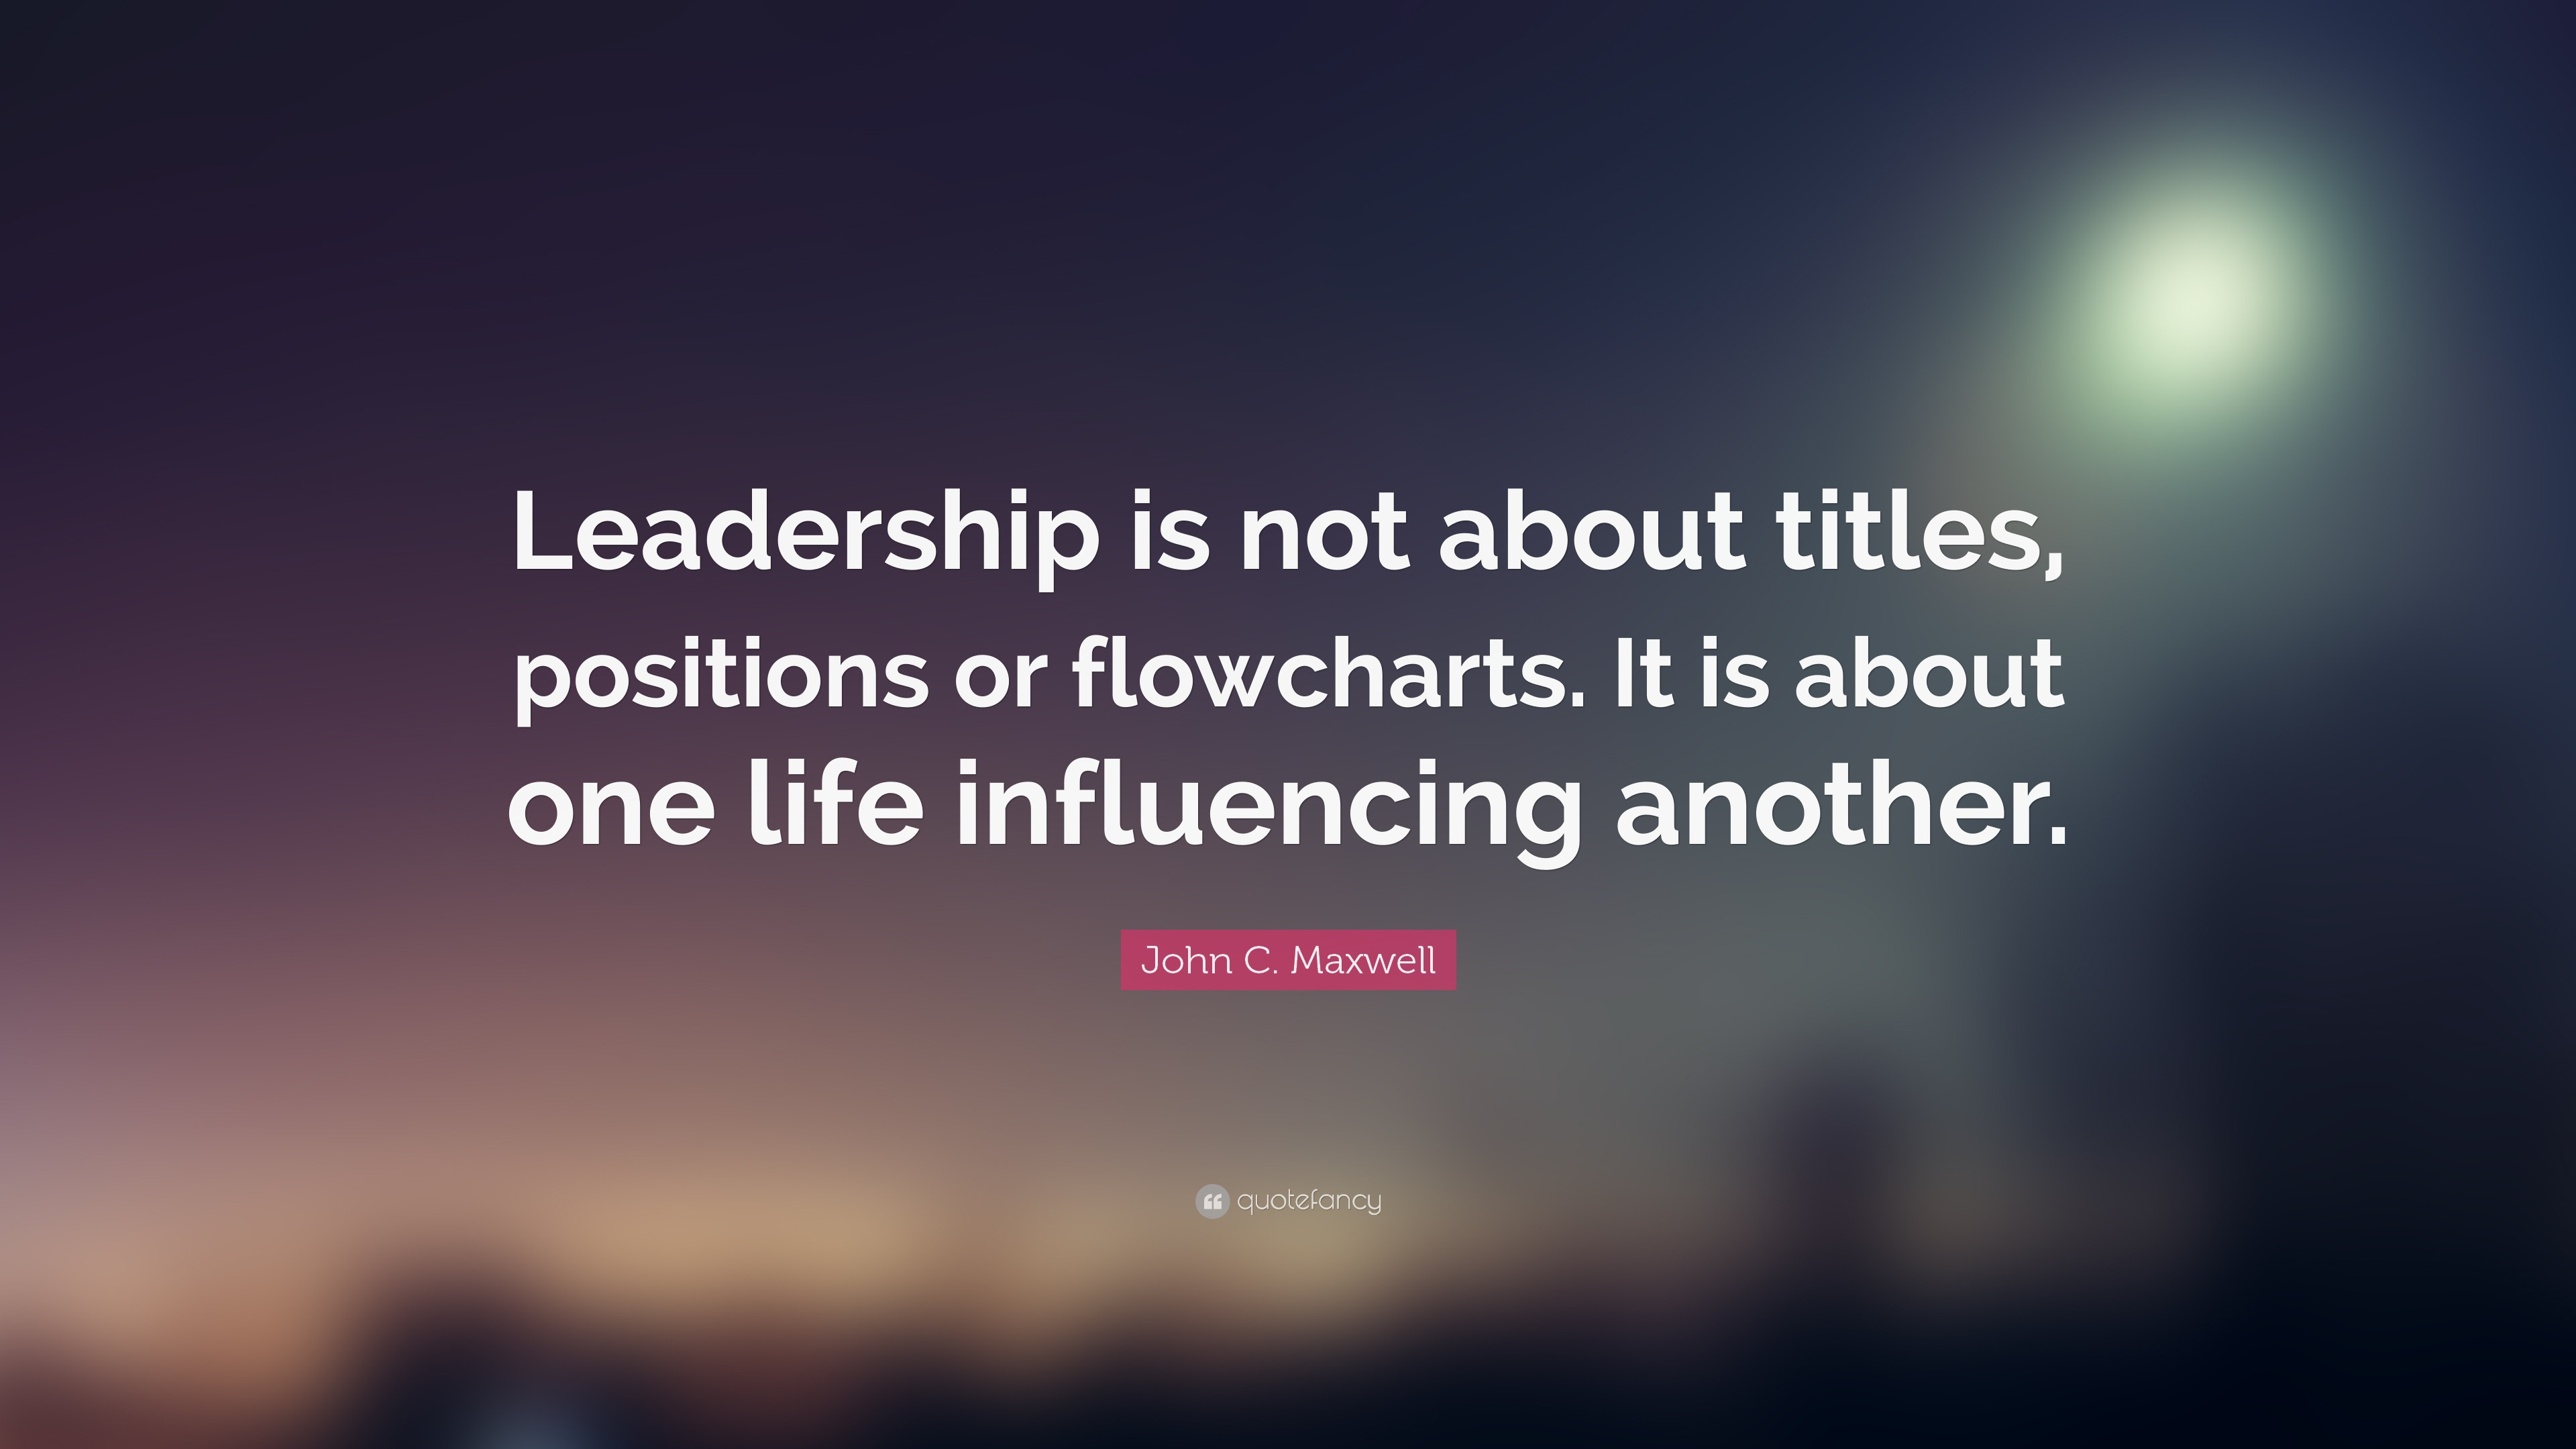 John C Maxwell Leadership Quotes
 John C Maxwell Quote “Leadership is not about titles